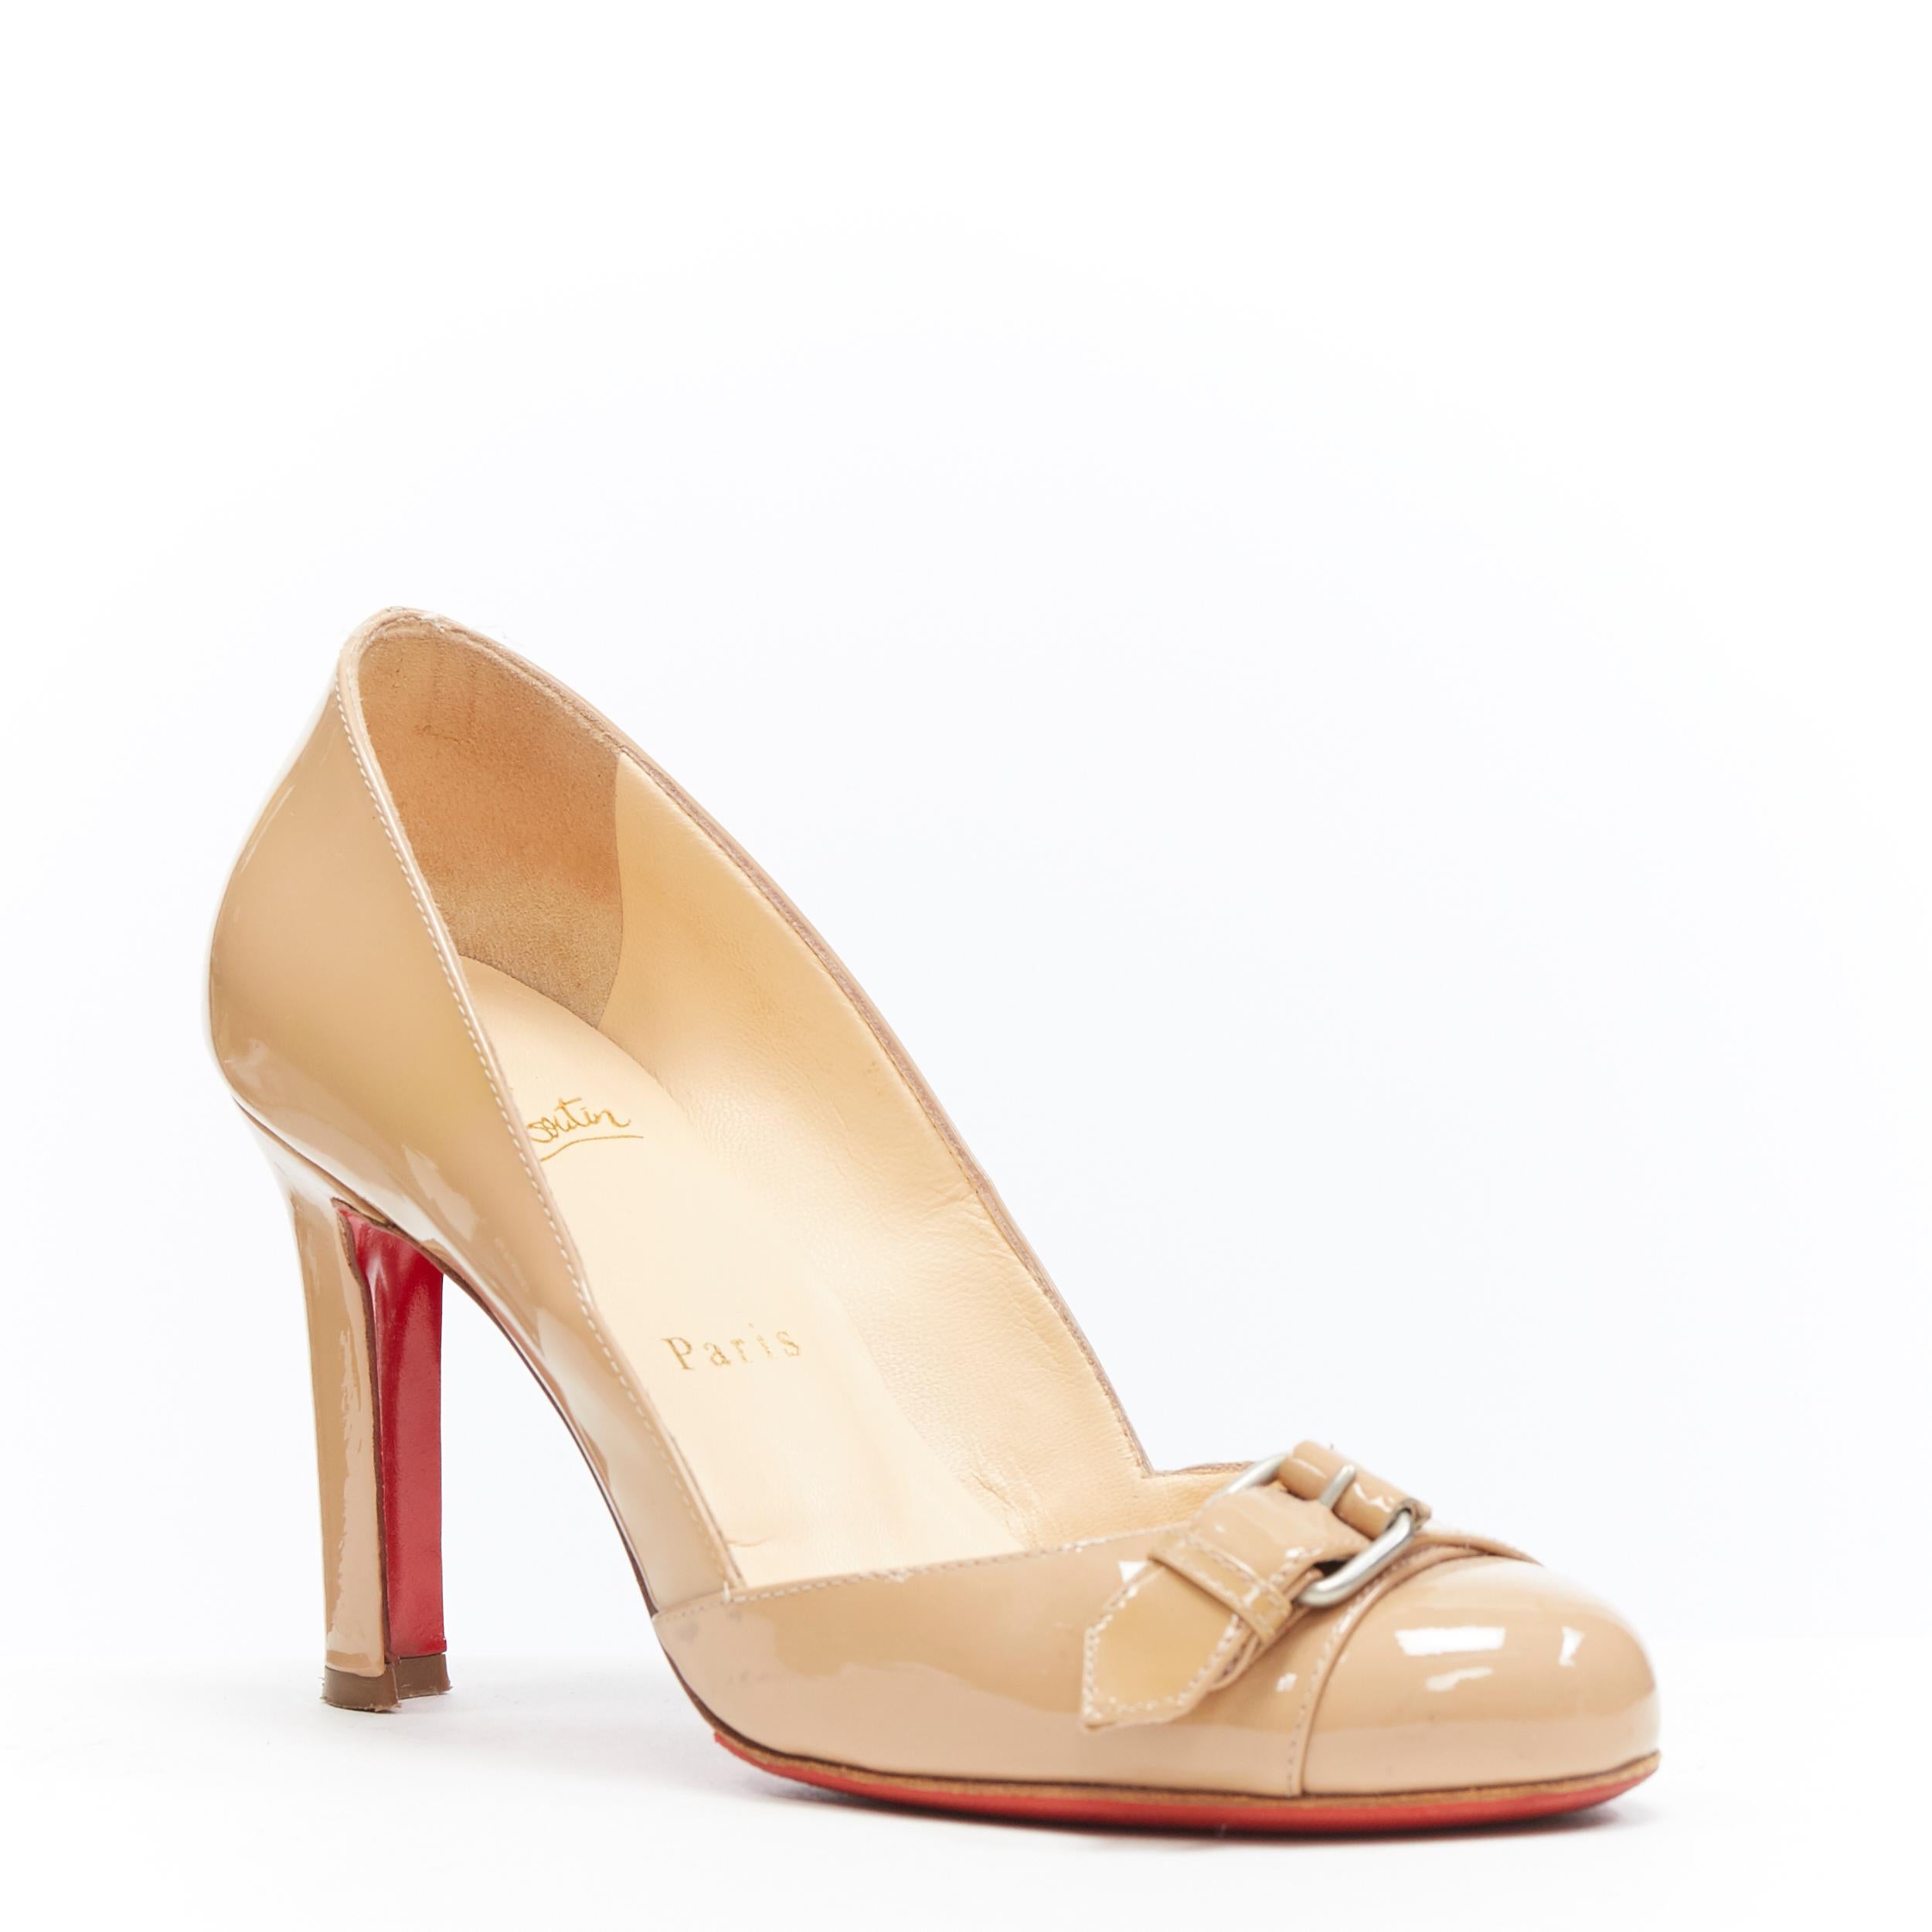 CHRISTIAN LOUBOUTIN Lilibelt 100 nude patent buckle detail almond toe pump EU36
Brand: Christian Louboutin
Designer: Christian Louboutin
Model Name / Style: Lilibelt 100
Material: Patent leather
Color: Beige
Pattern: Solid
Lining material: